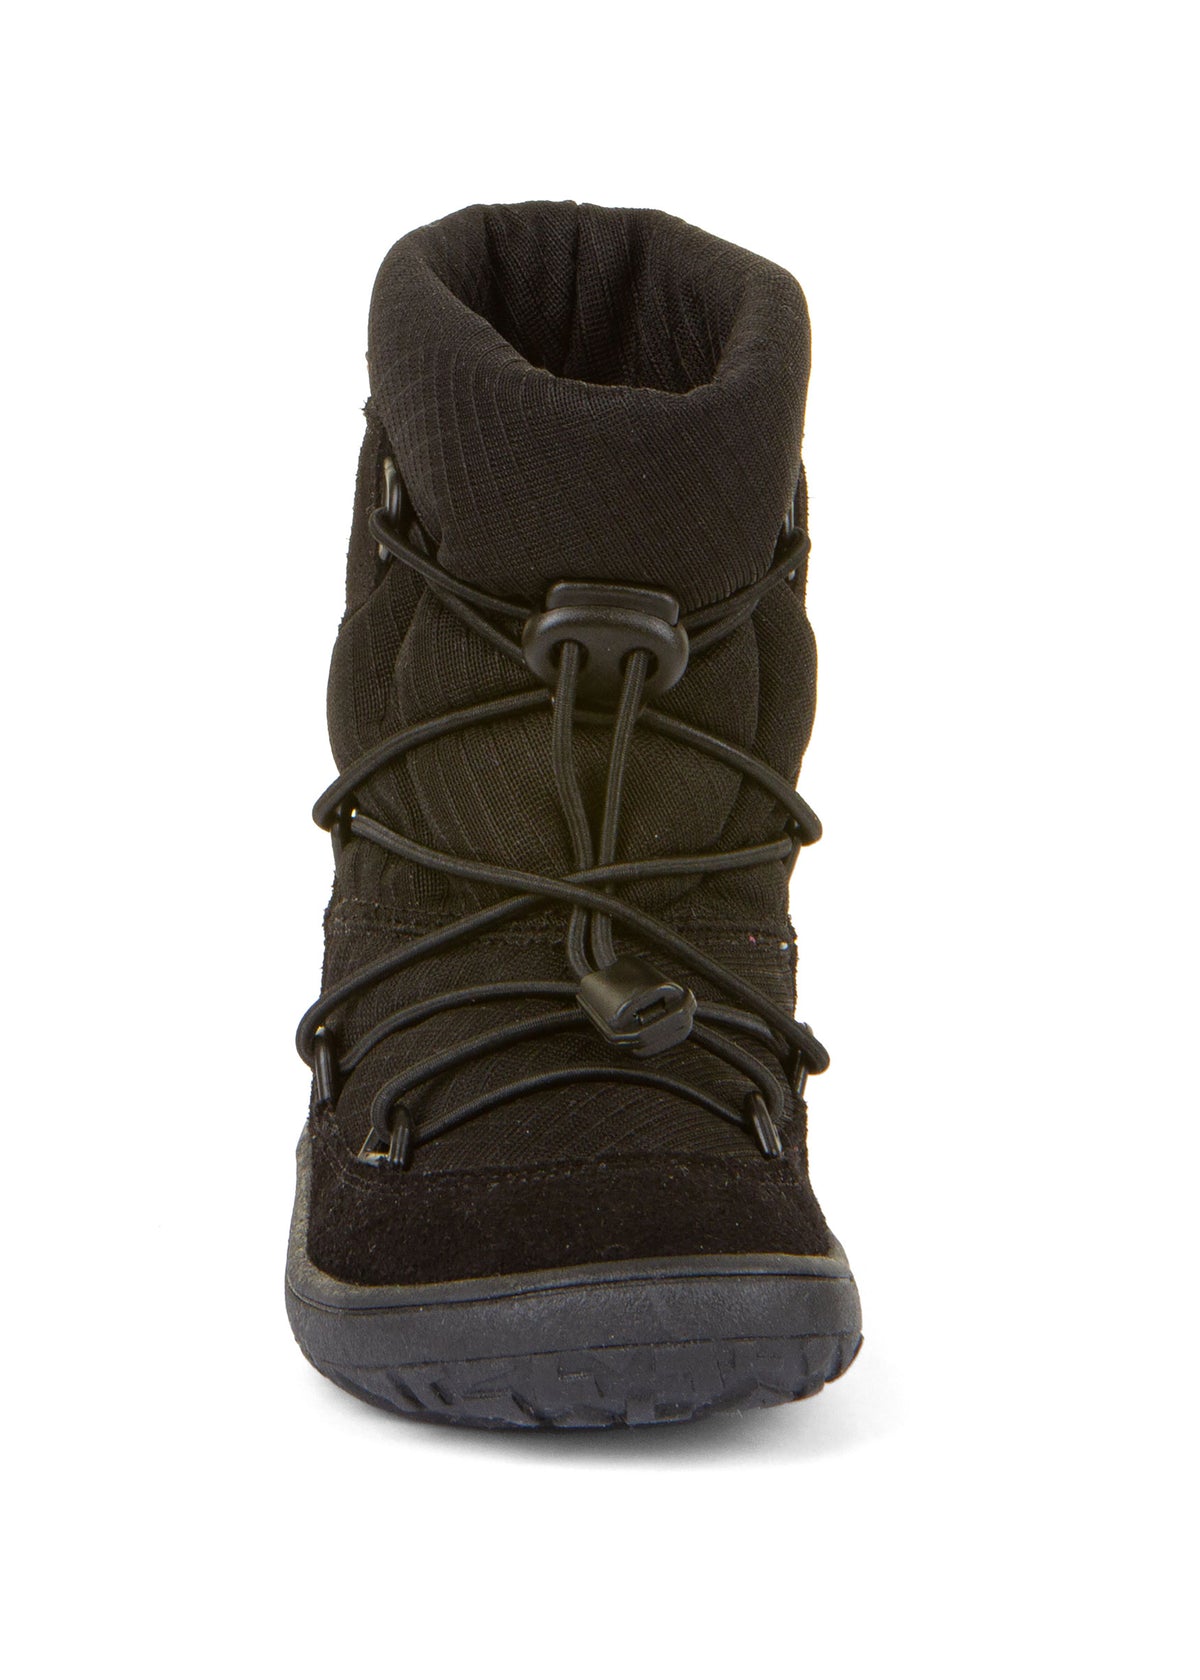 Barefoot shoes - winter boots, TEX Track Wool - black